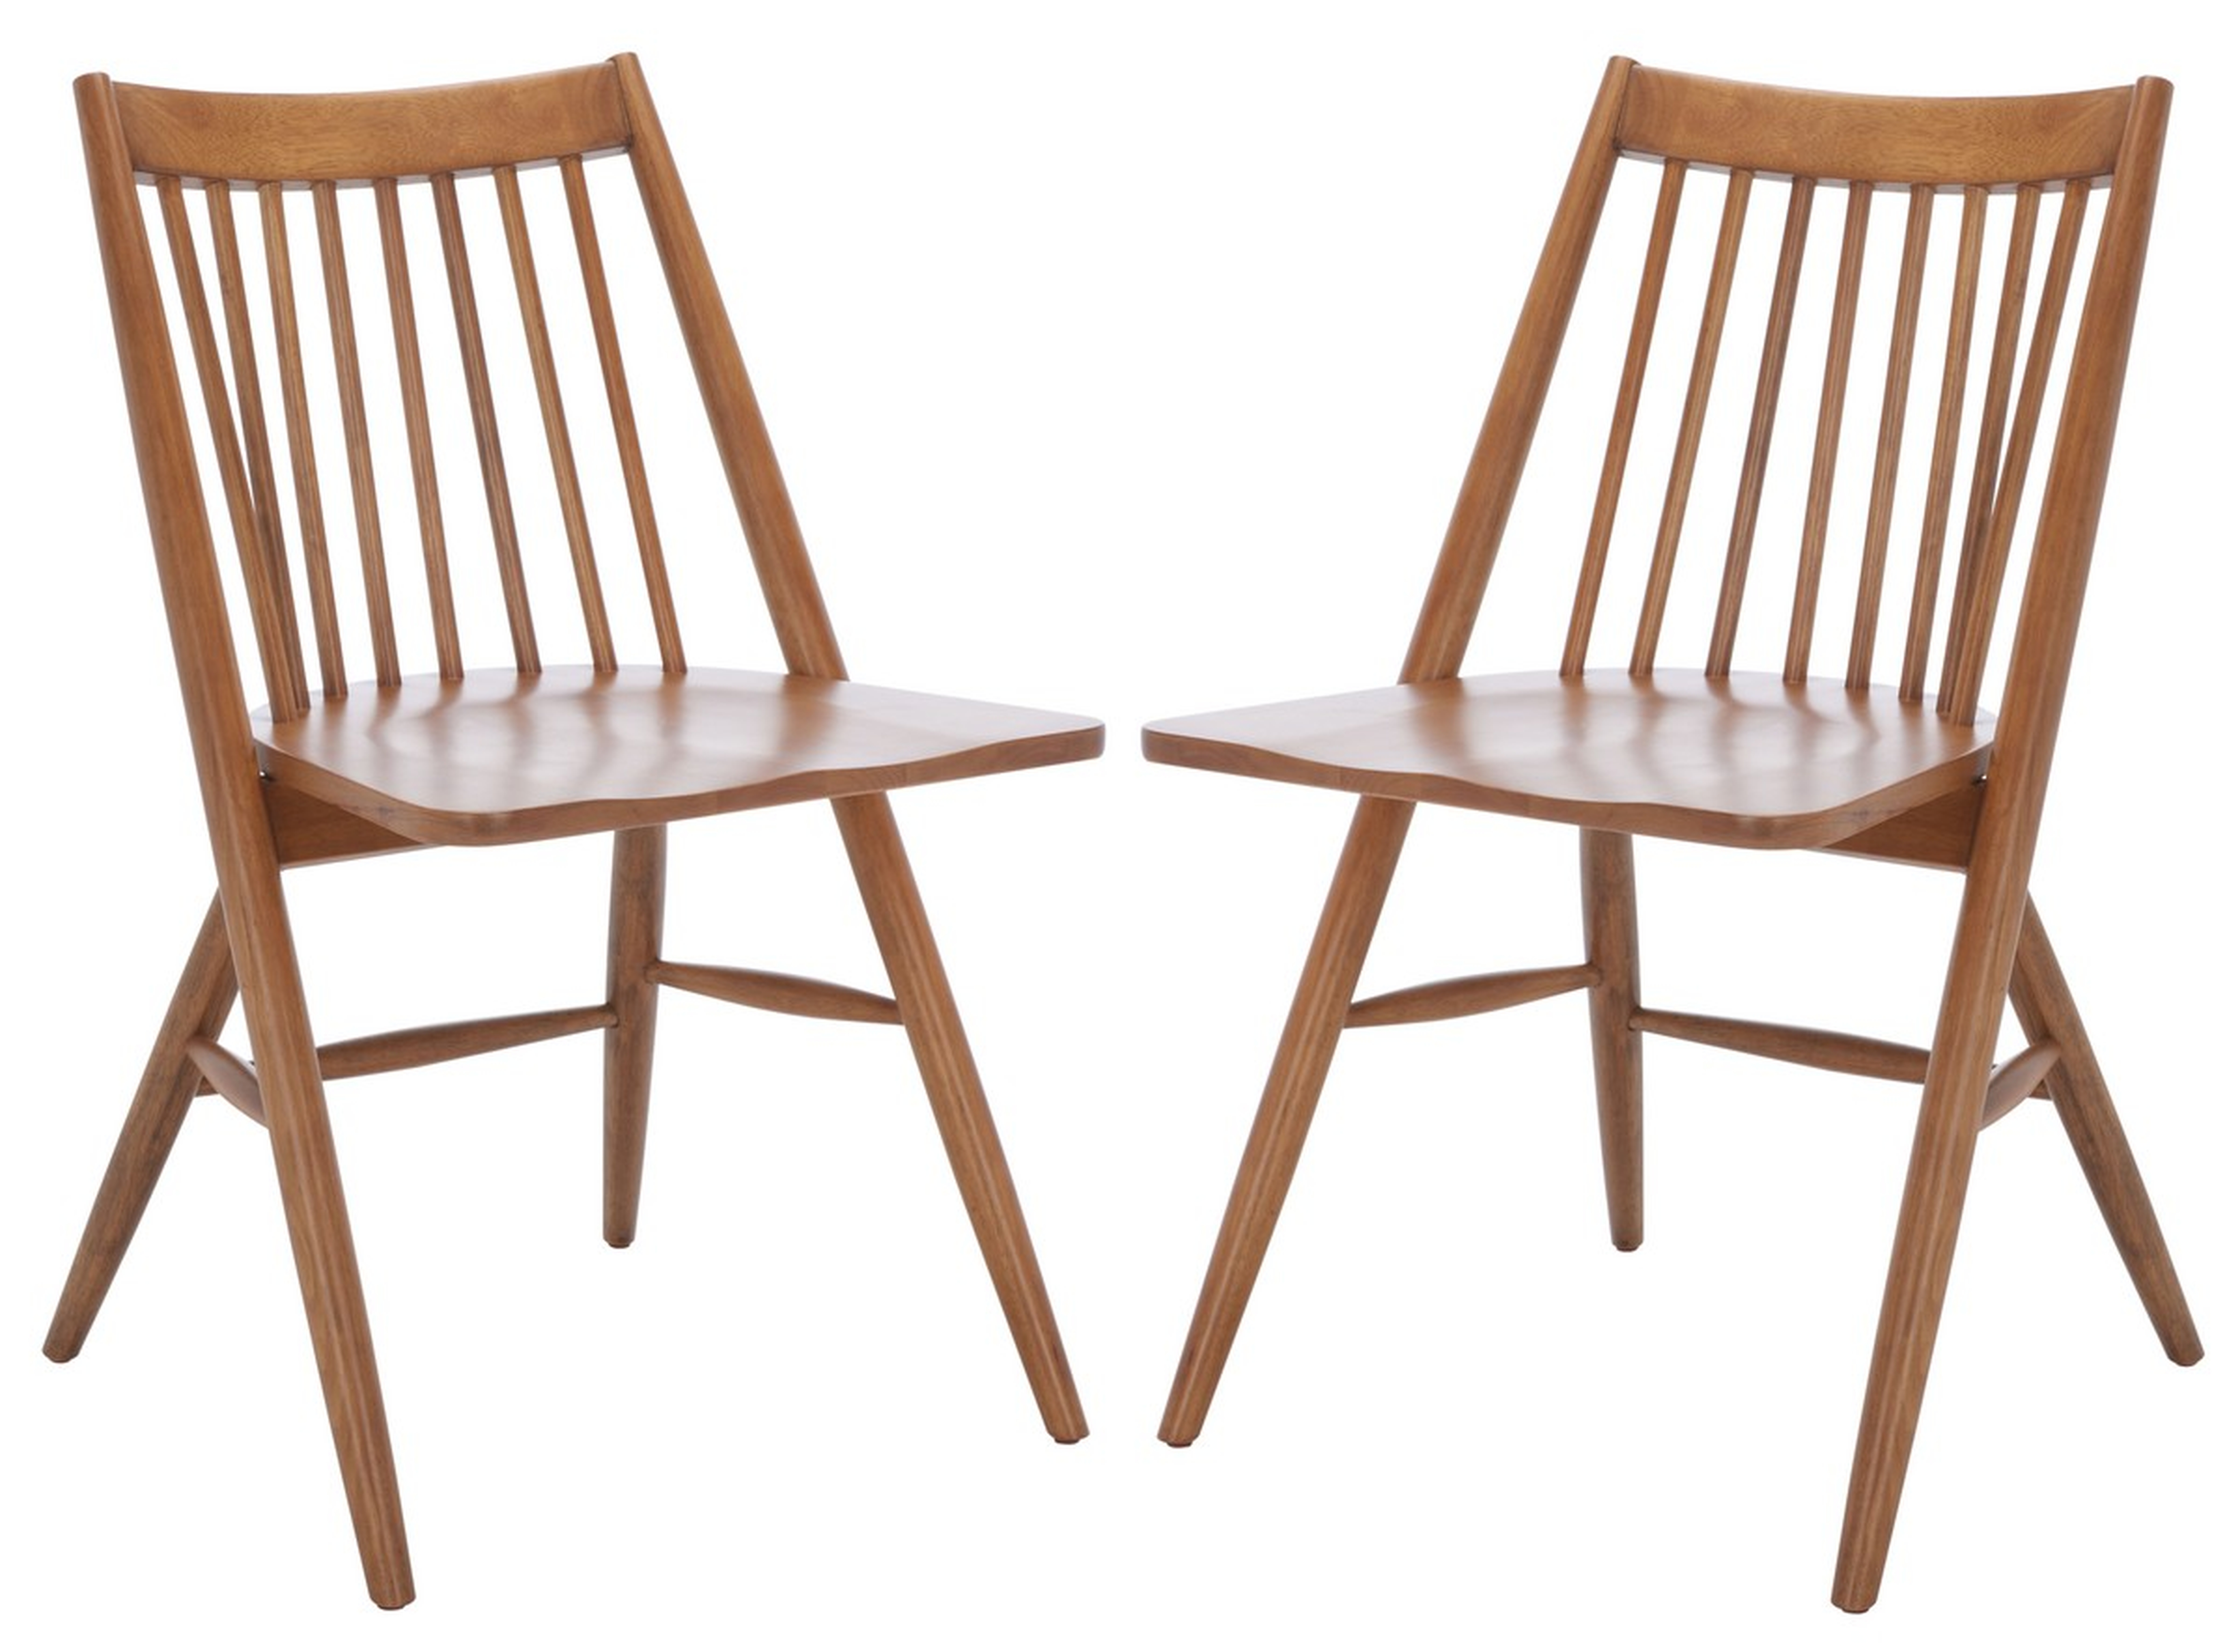 Wren 19" Spindle Dining Chair, Walnut, Set of 2 - Arlo Home